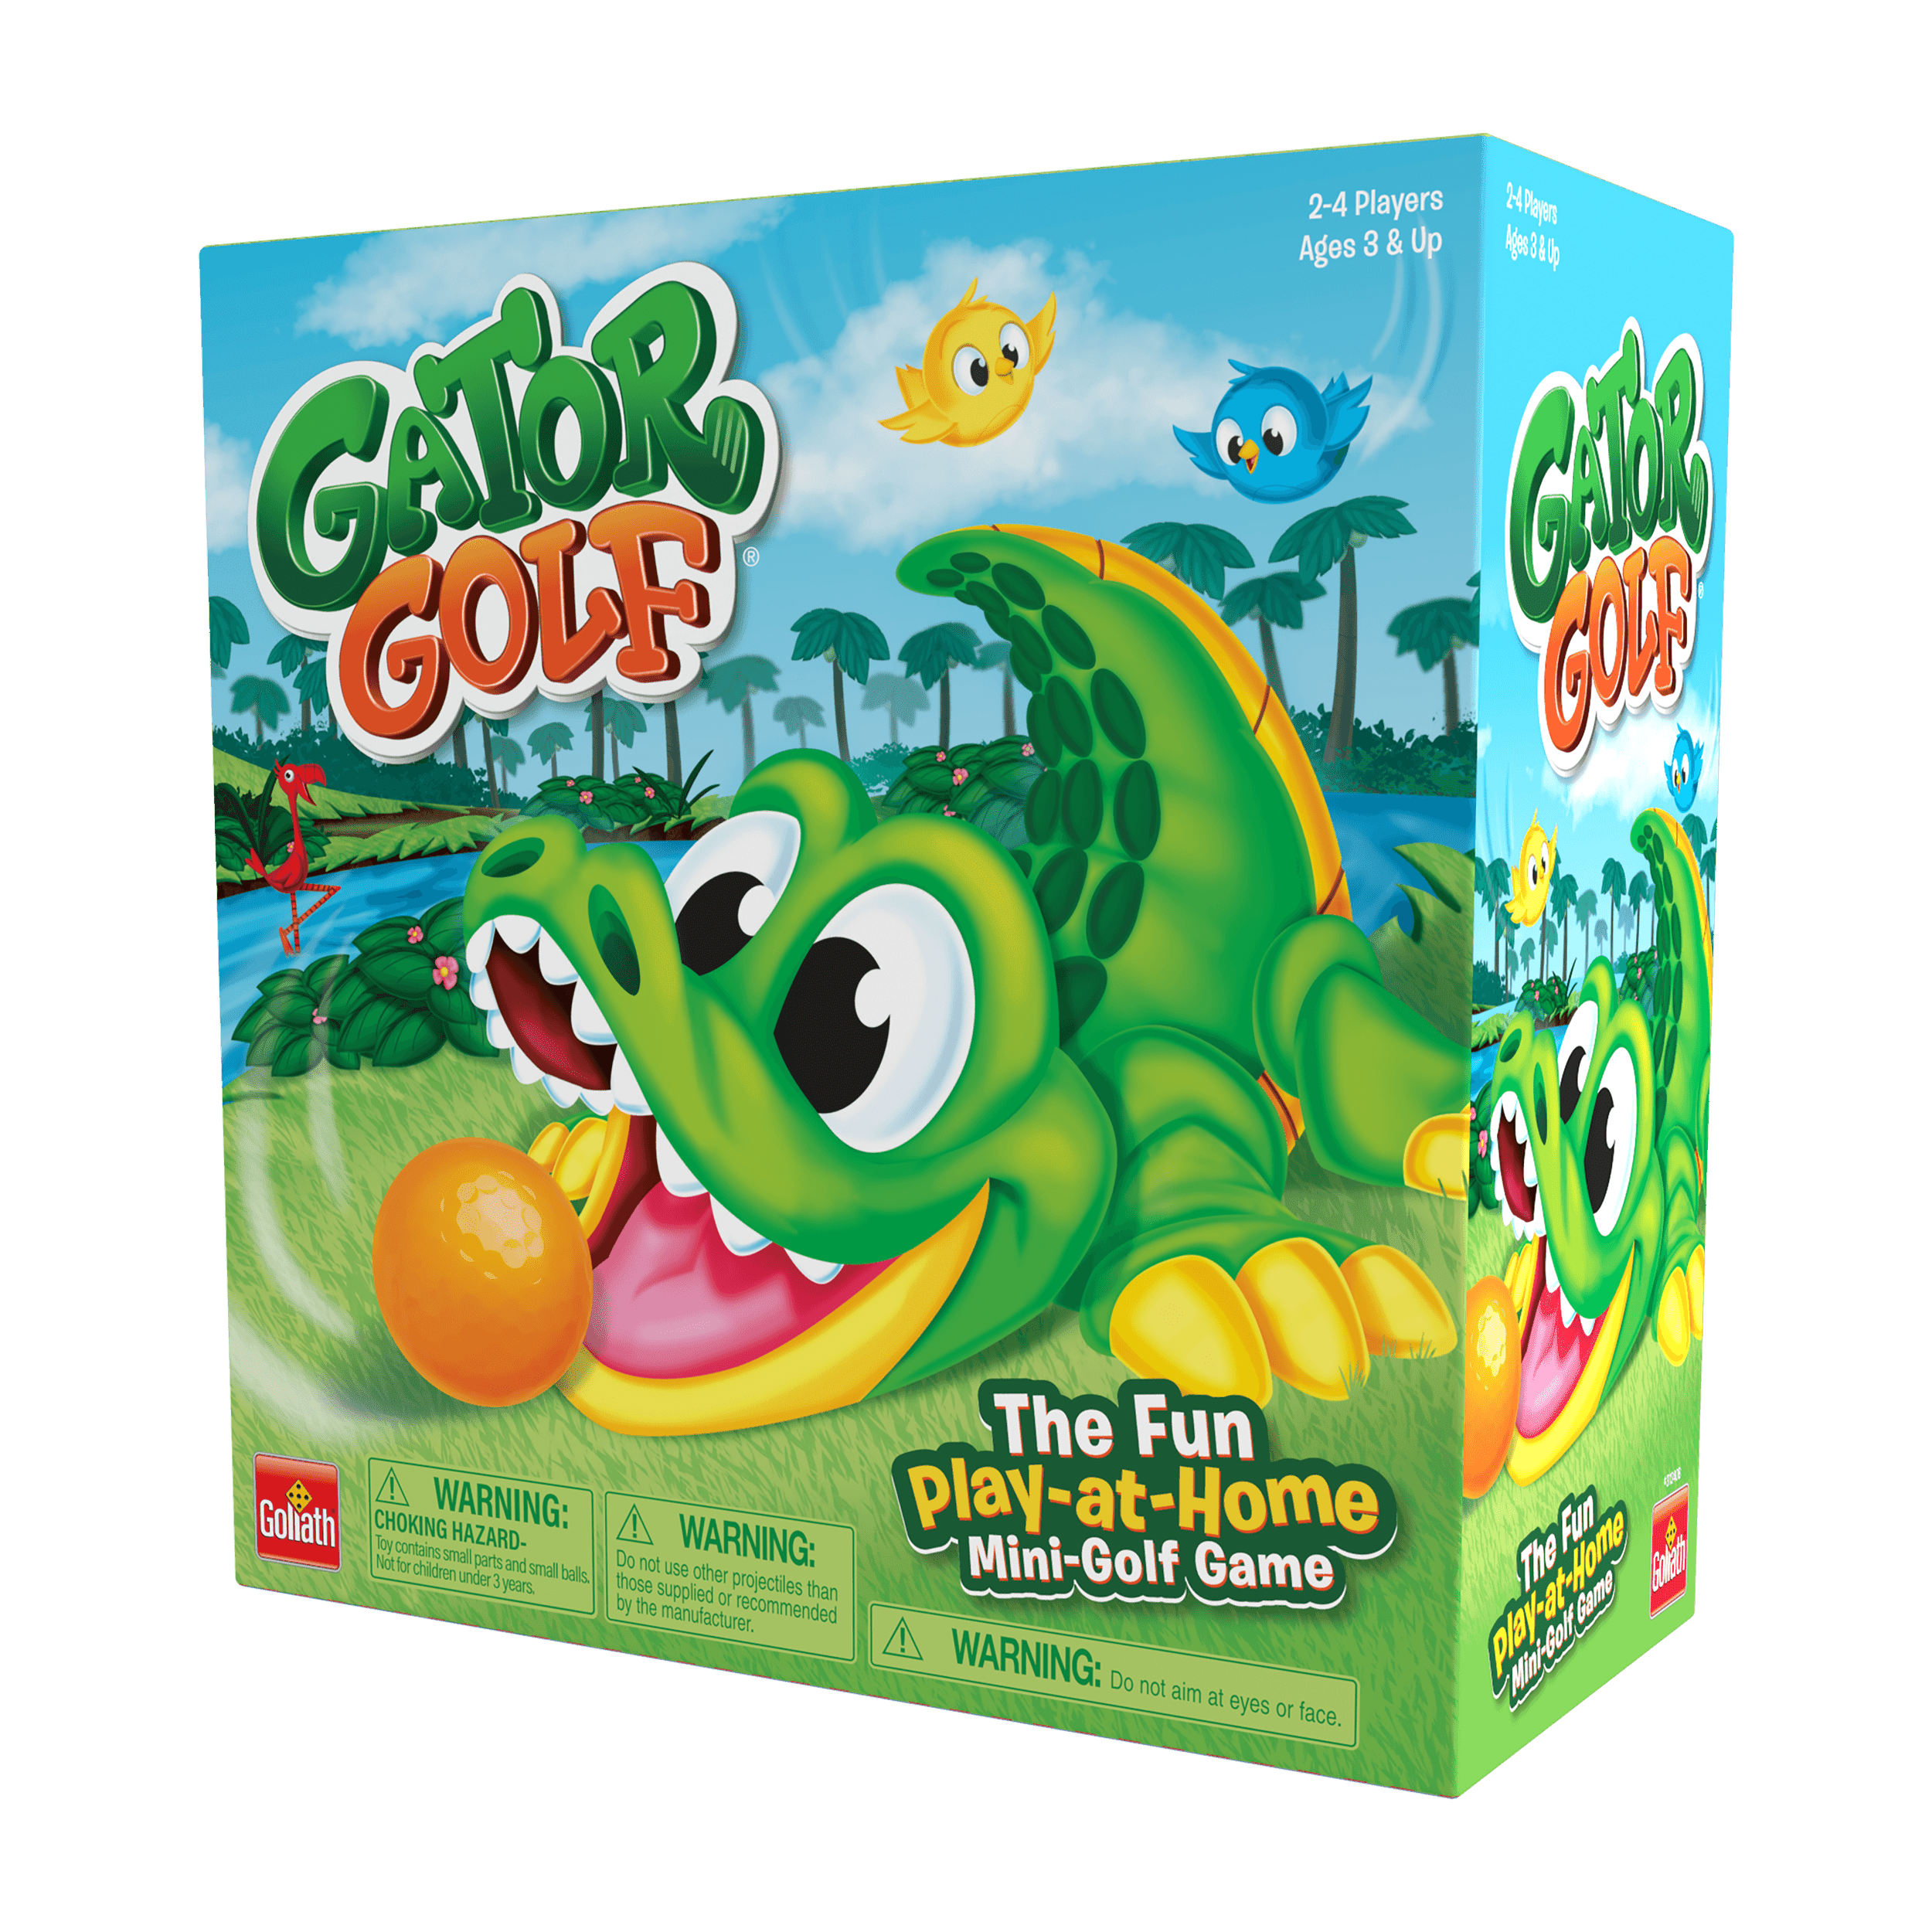 27 x x Game for Kids Aged 4+ Play-at-Home Mini Golf Goliath Games 31240 Gator 